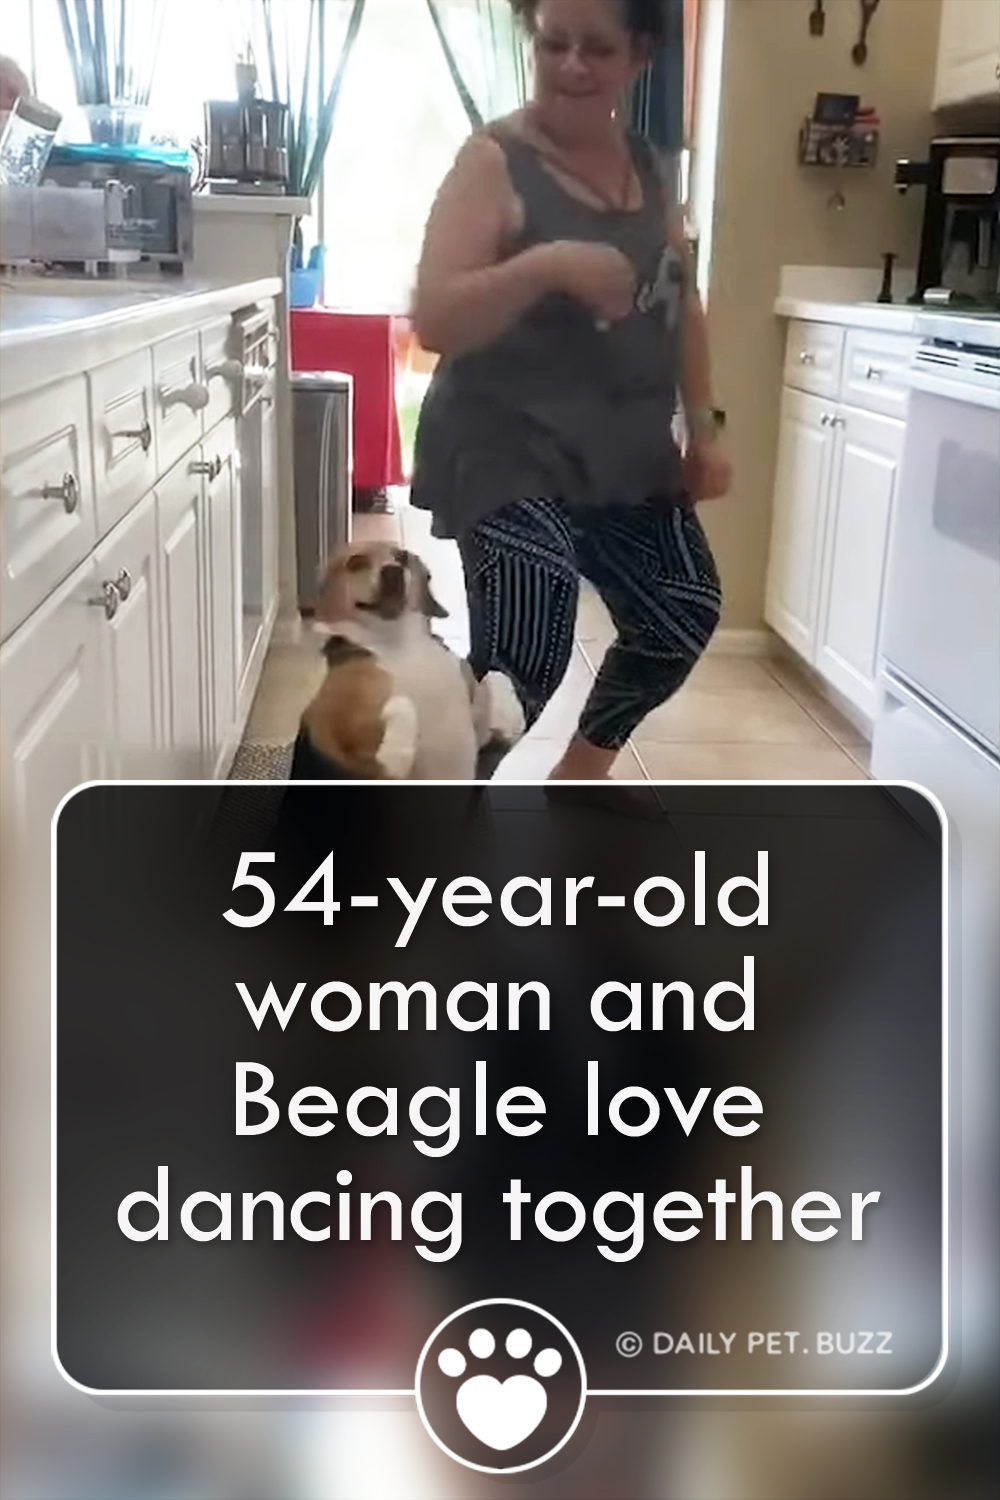 54-year-old woman and Beagle love dancing together